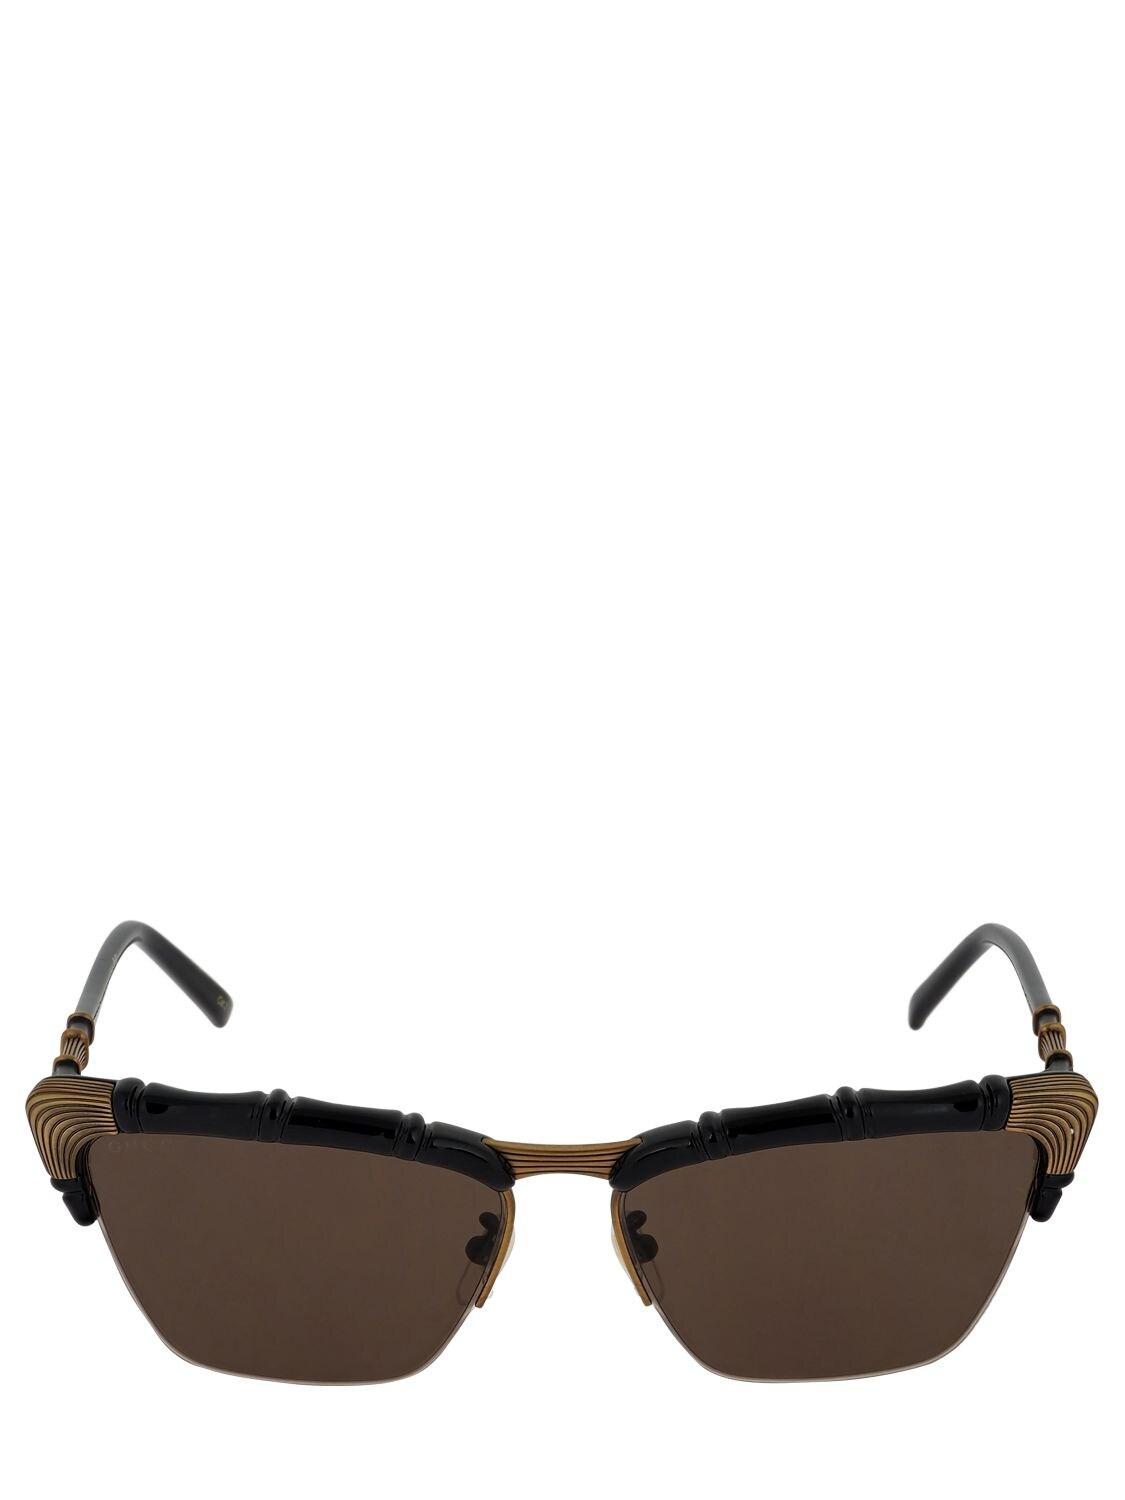 Gucci Bamboo Effect Cat Eye Sunglasses in Brown | Lyst